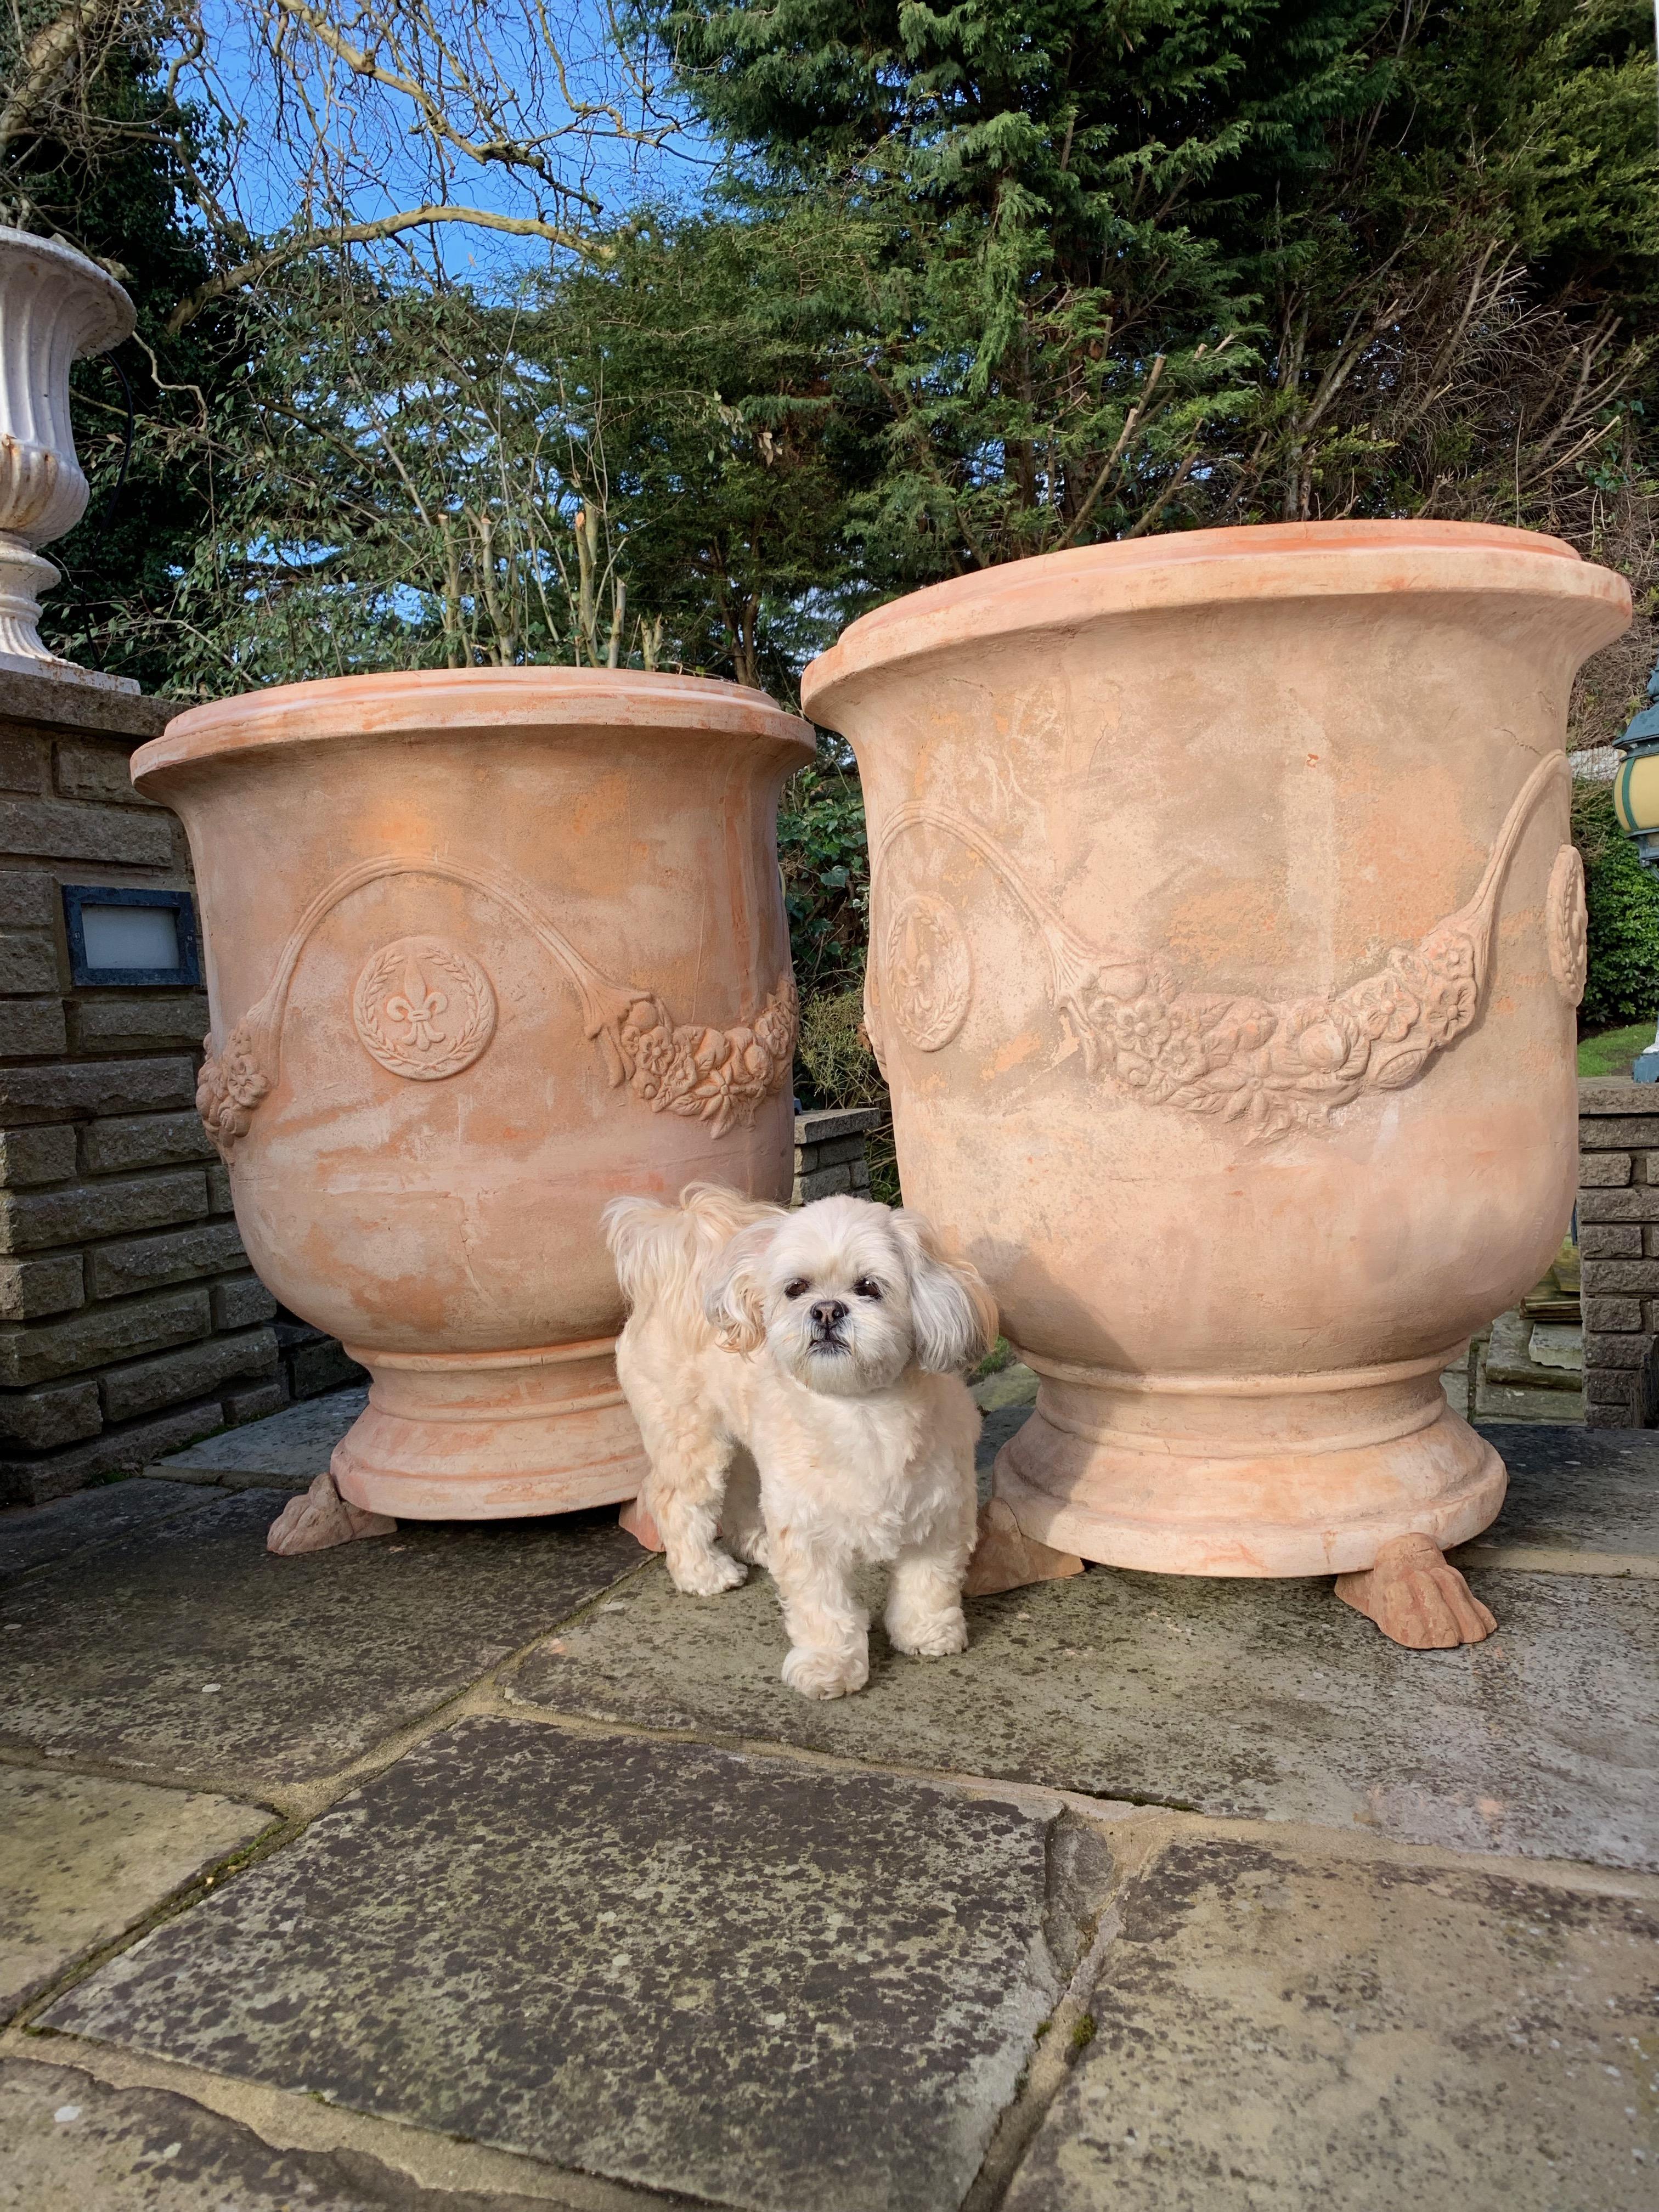 A pair of 20th century large handmade terracotta pots. The very best handmade terracotta pots from Tuscany. Vaso festonato. Superb pots. These are big and handmade.

The most famous kind of Tuscan terracotta is produced in Impruneta, an ancient